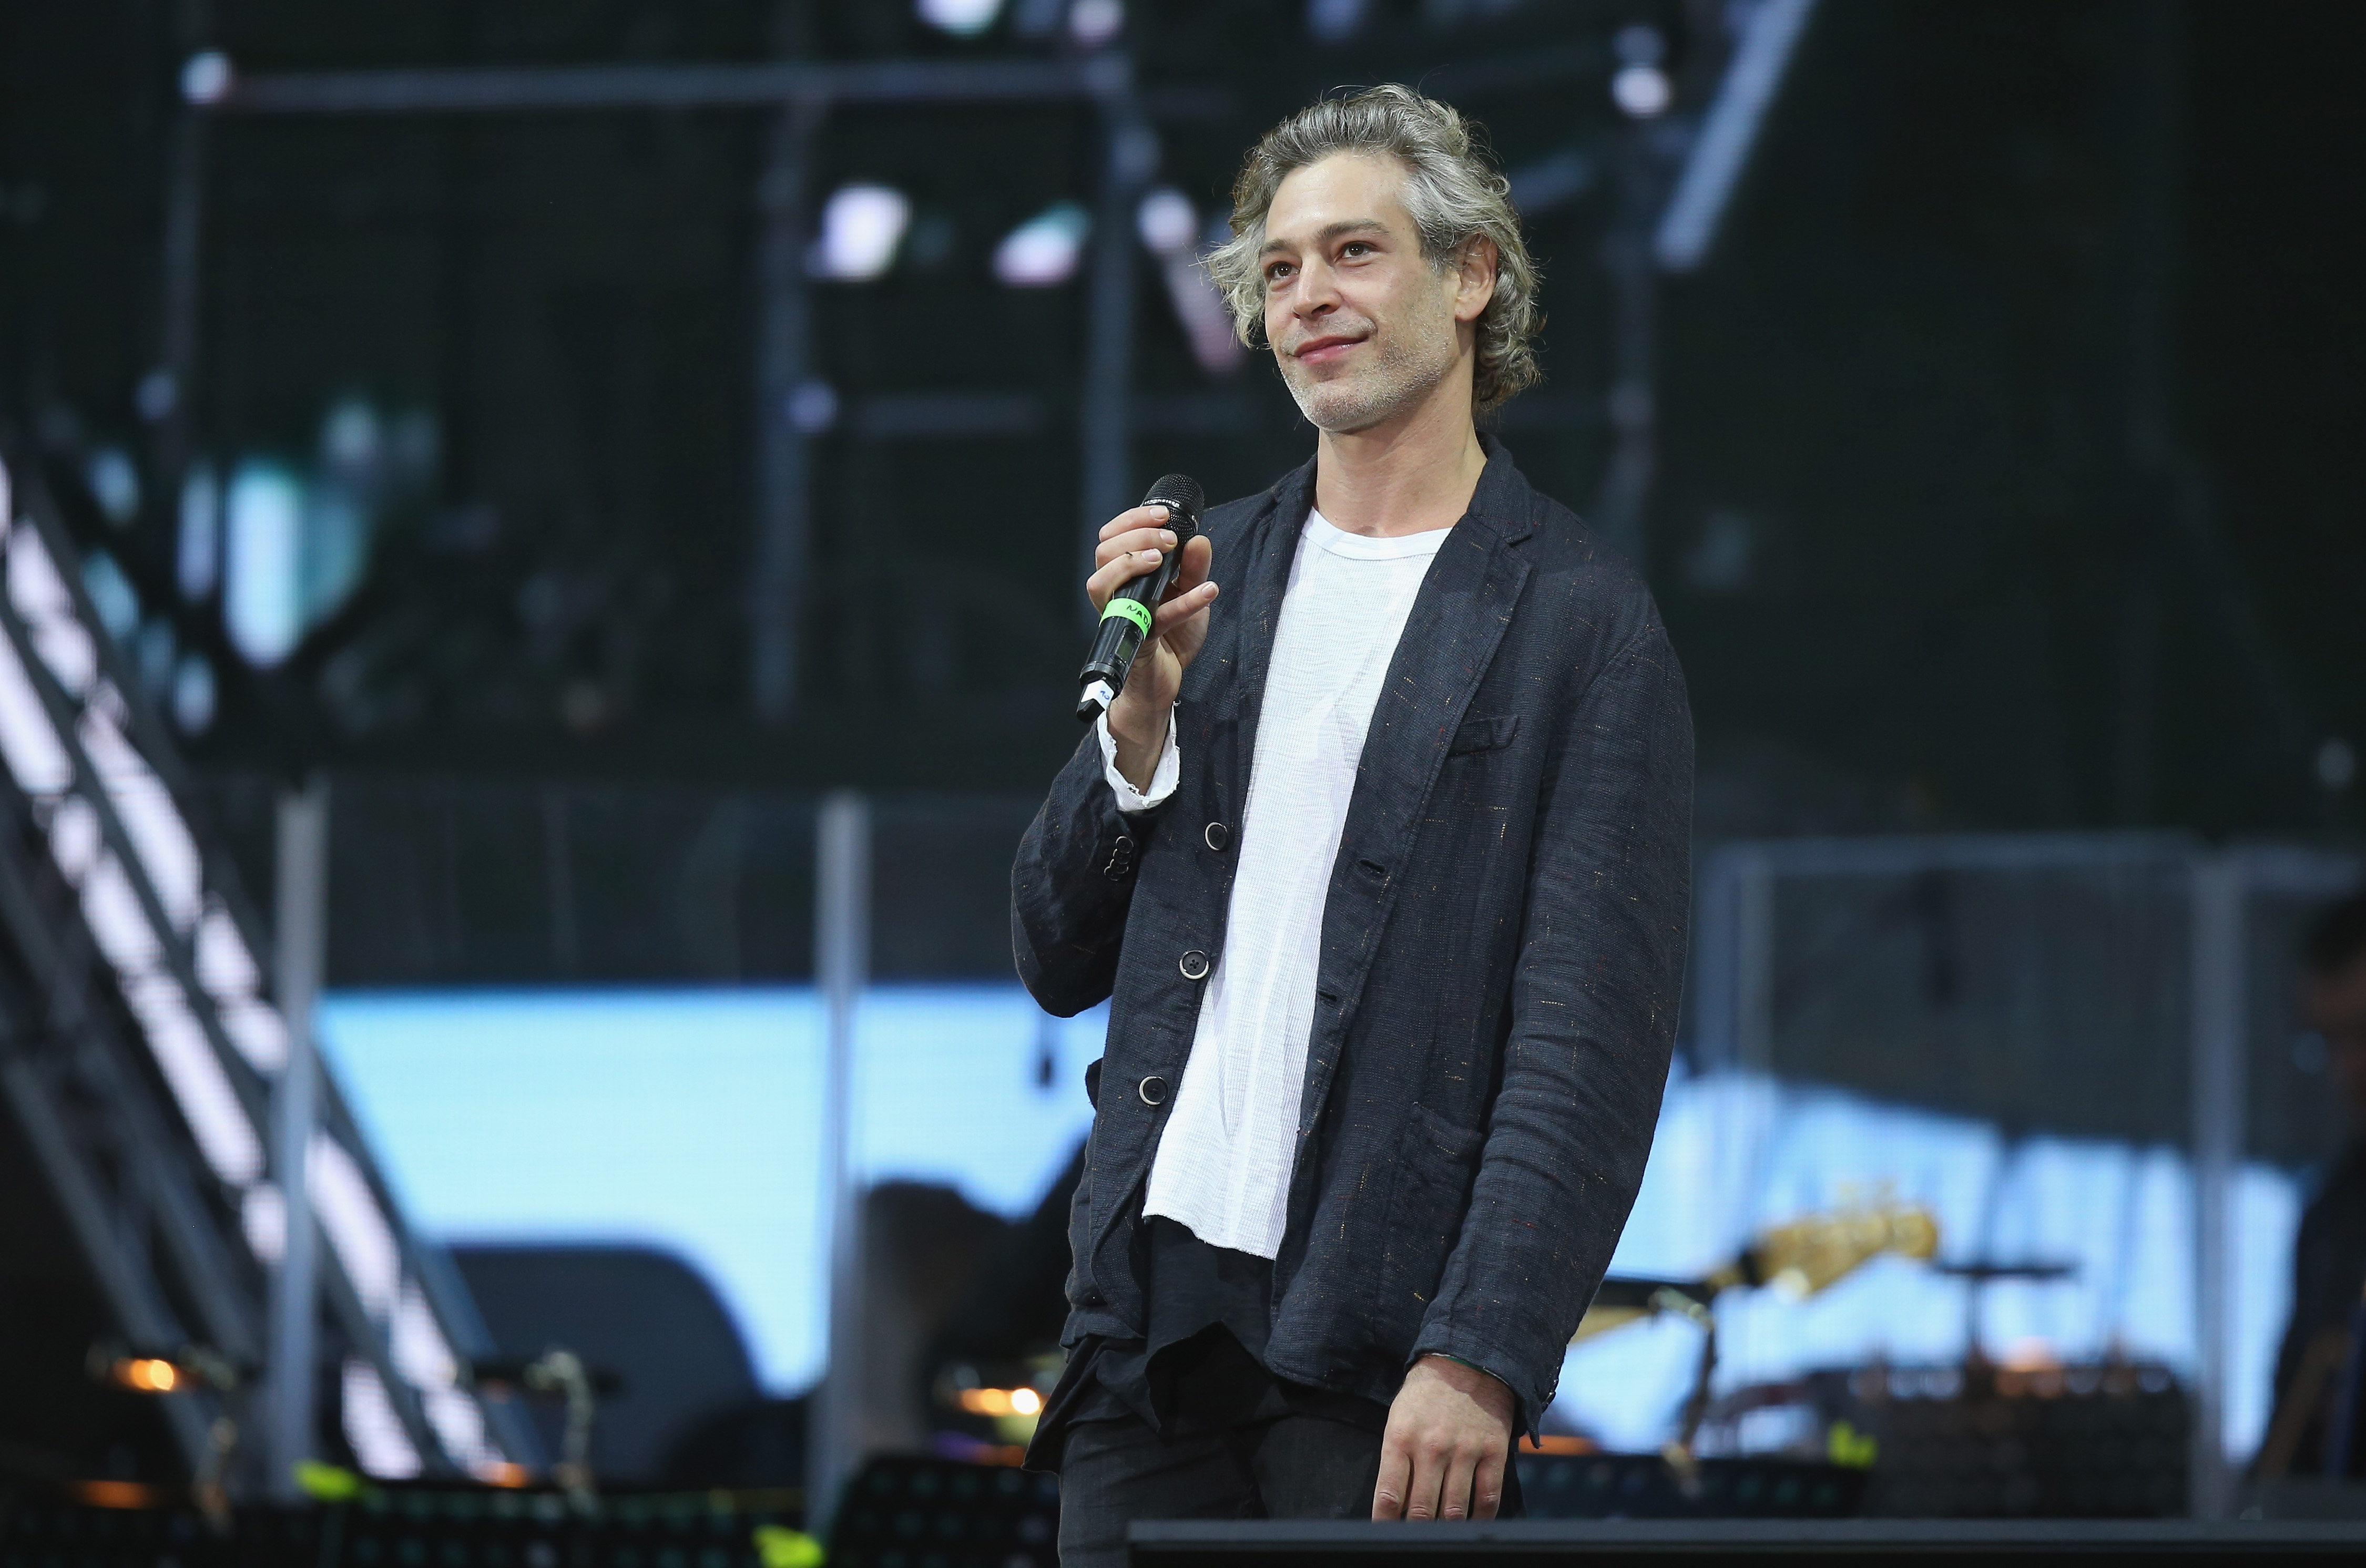 Singer Matisyahu performs at the official opening ceremony of the European Maccabi Games at the Waldbuehne in Berlin on July 28, 2015. (Sean Gallup—Getty Images)